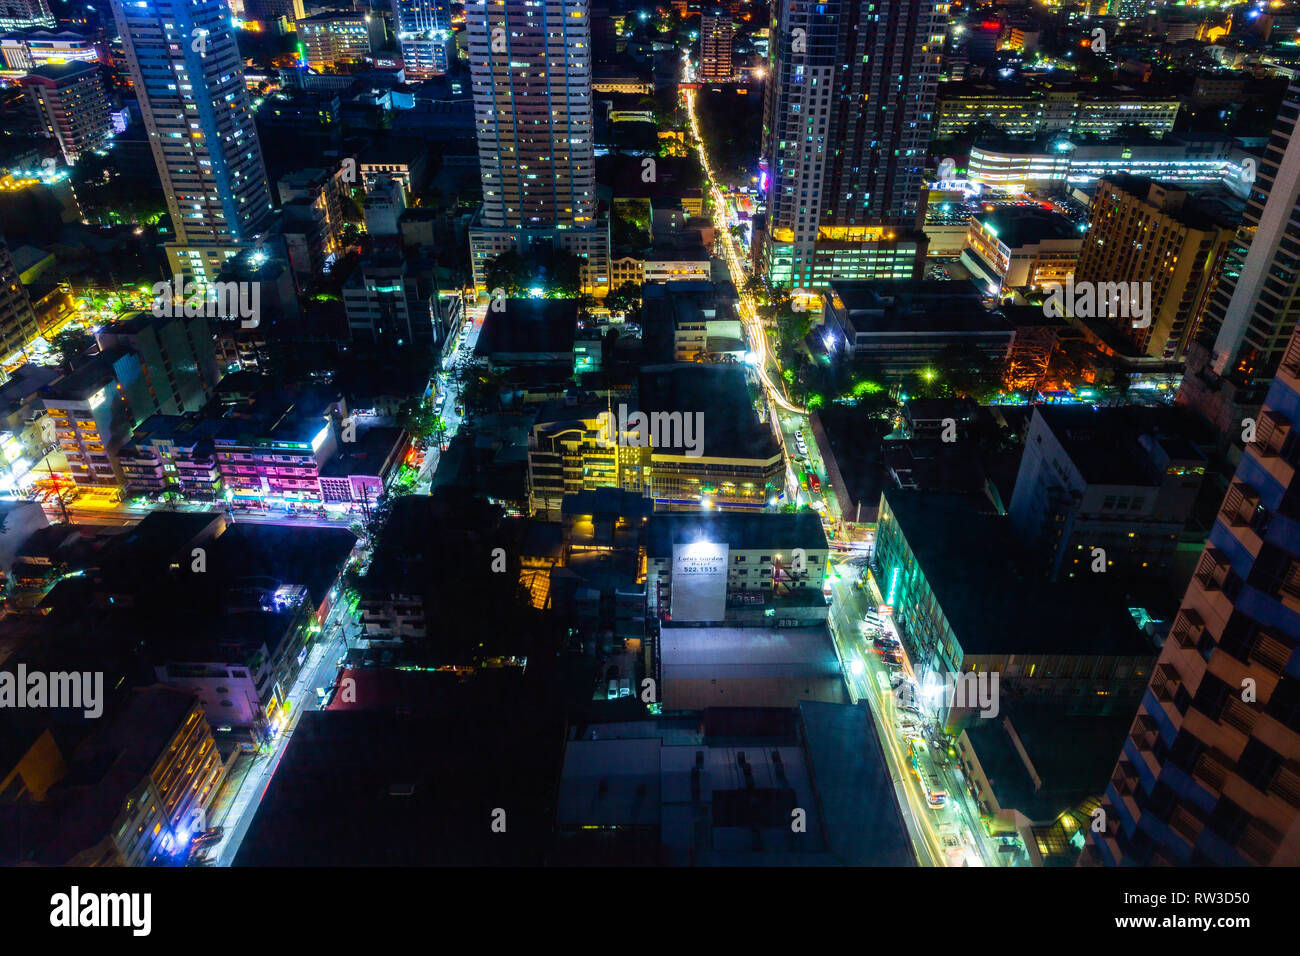 Manila, Philippines - November 11, 2018: Night view of the illuminated streets of the Malate district from above on November 11, 2018 in Metro Manila, Stock Photo